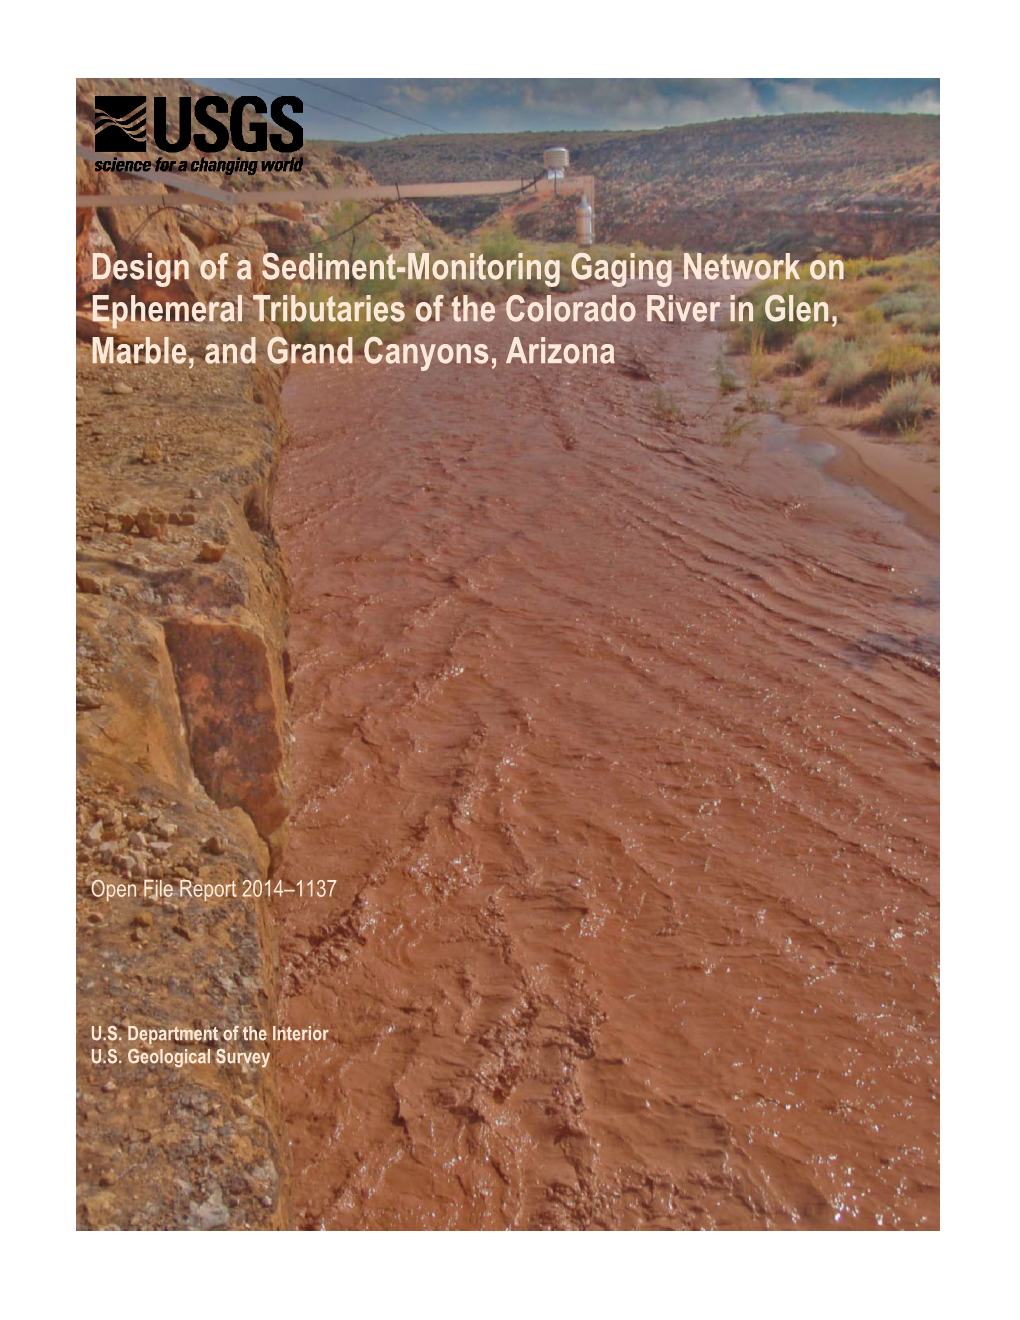 Design of a Sediment-Monitoring Gaging Network on Ephemeral Tributaries of the Colorado River in Glen, Marble, and Grand Canyons, Arizona